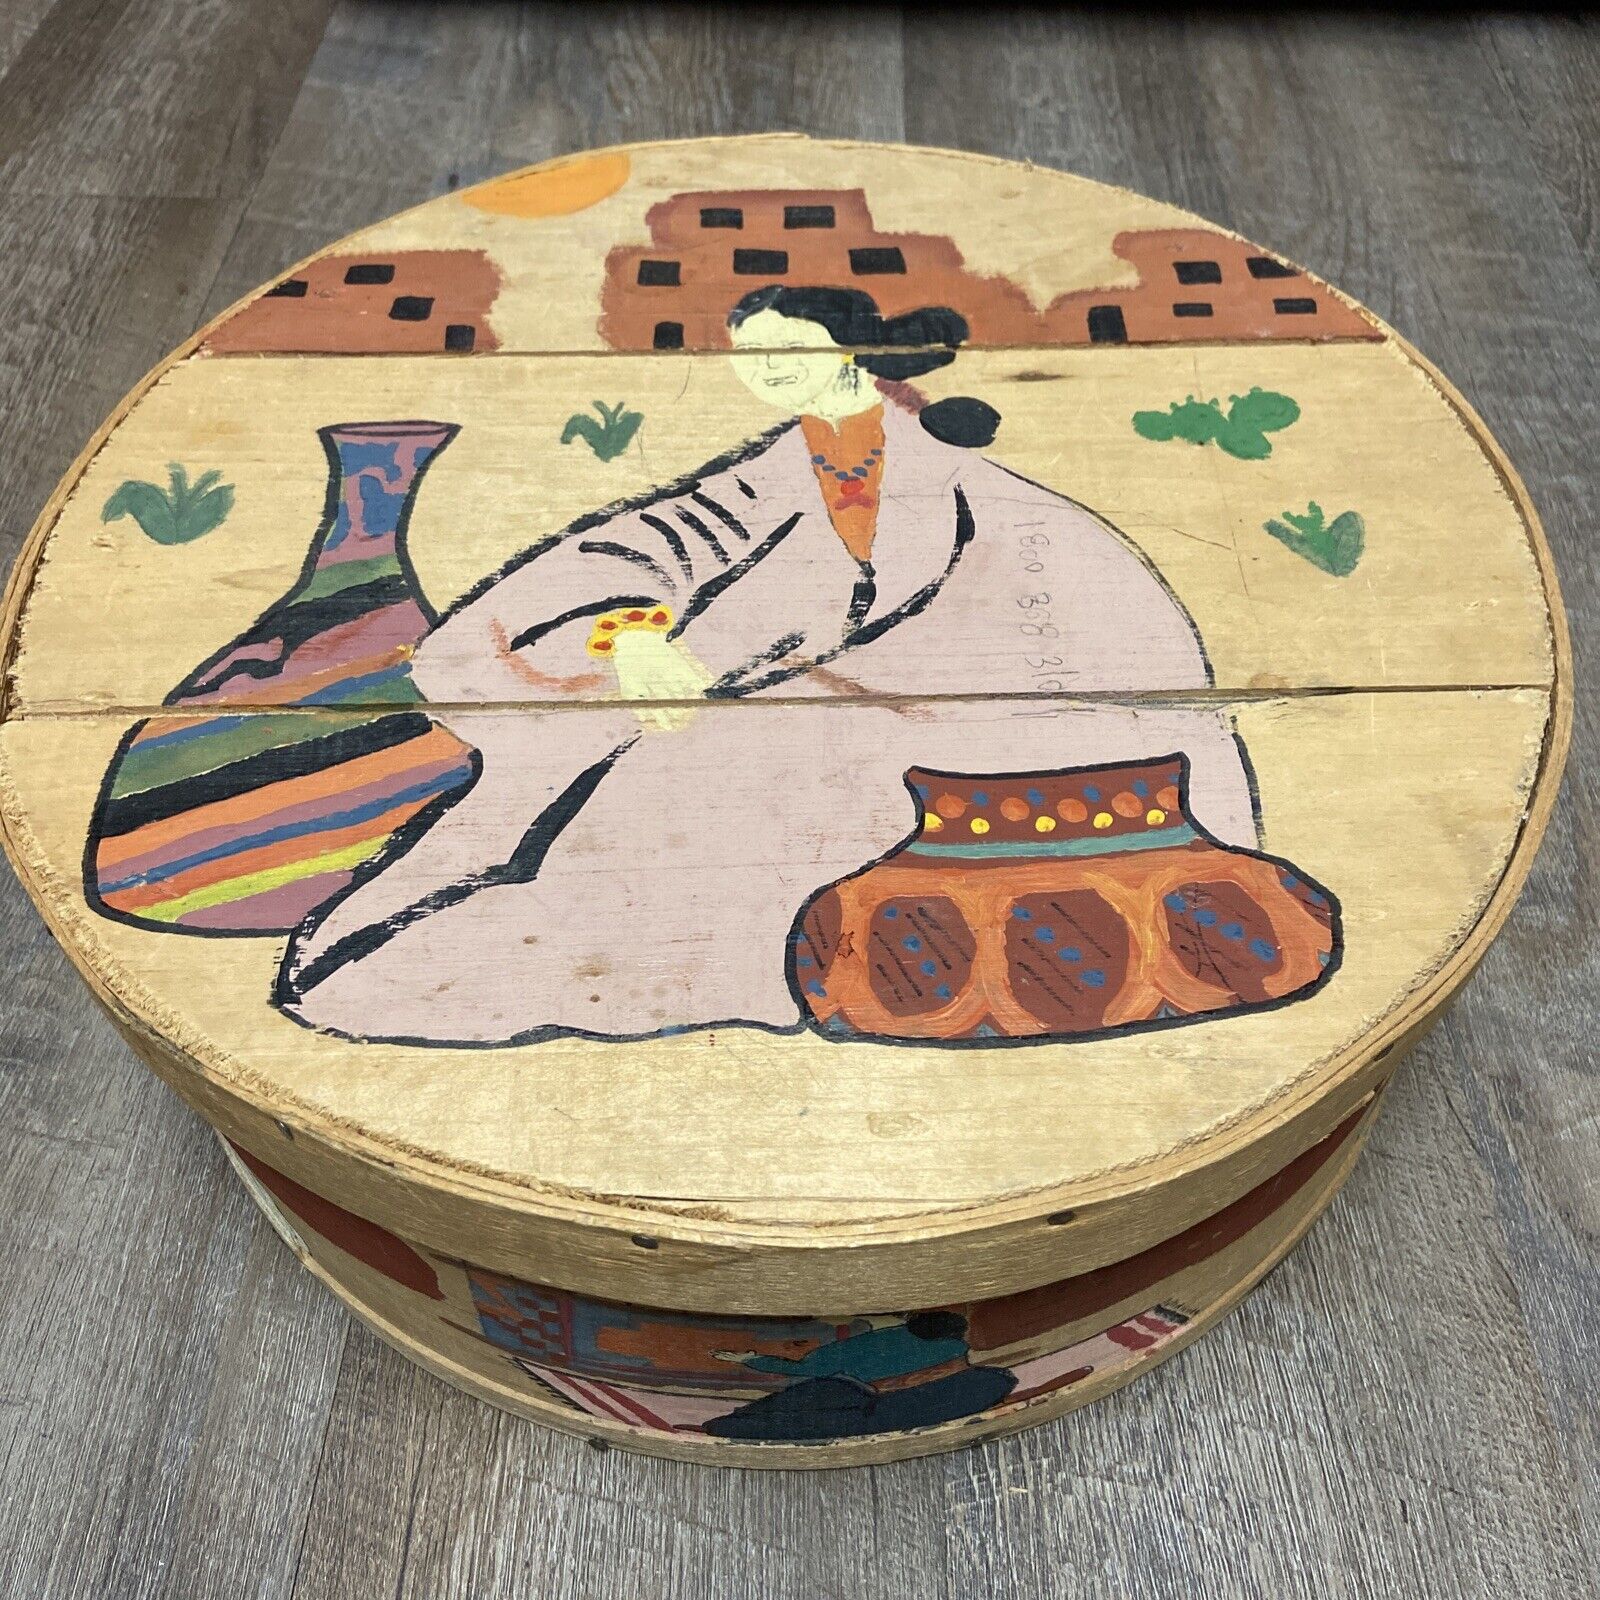 Vintage Dufeck\'s Denmark WI Wood Cheese Box Hand Painted Southwestern Design 